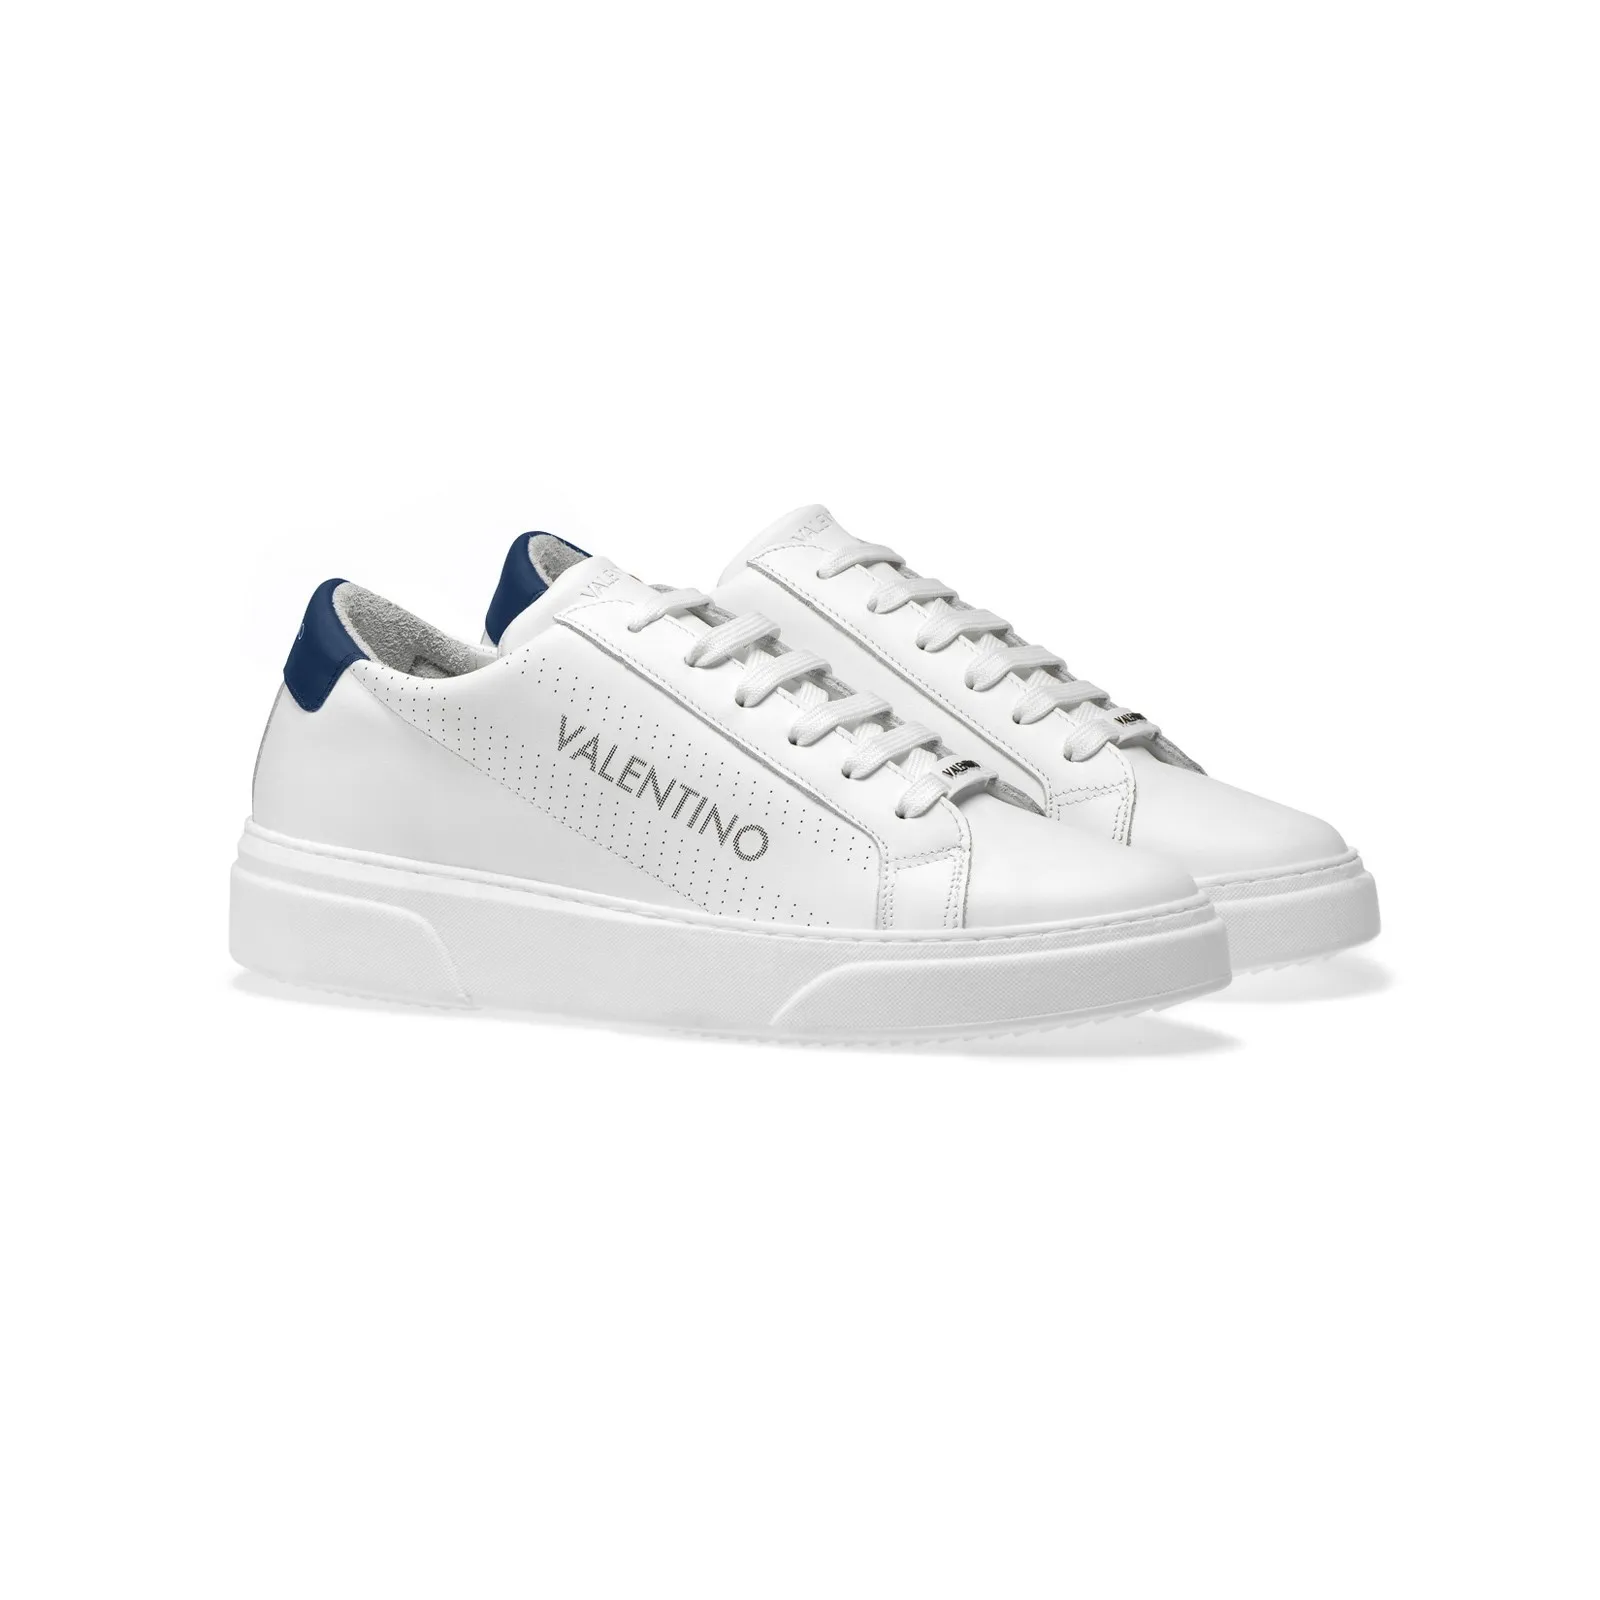 Source Original Valentino Shoes Made in Italy Lace-Up in White Hide and Blu Insert for Leisure Time on m.alibaba.com